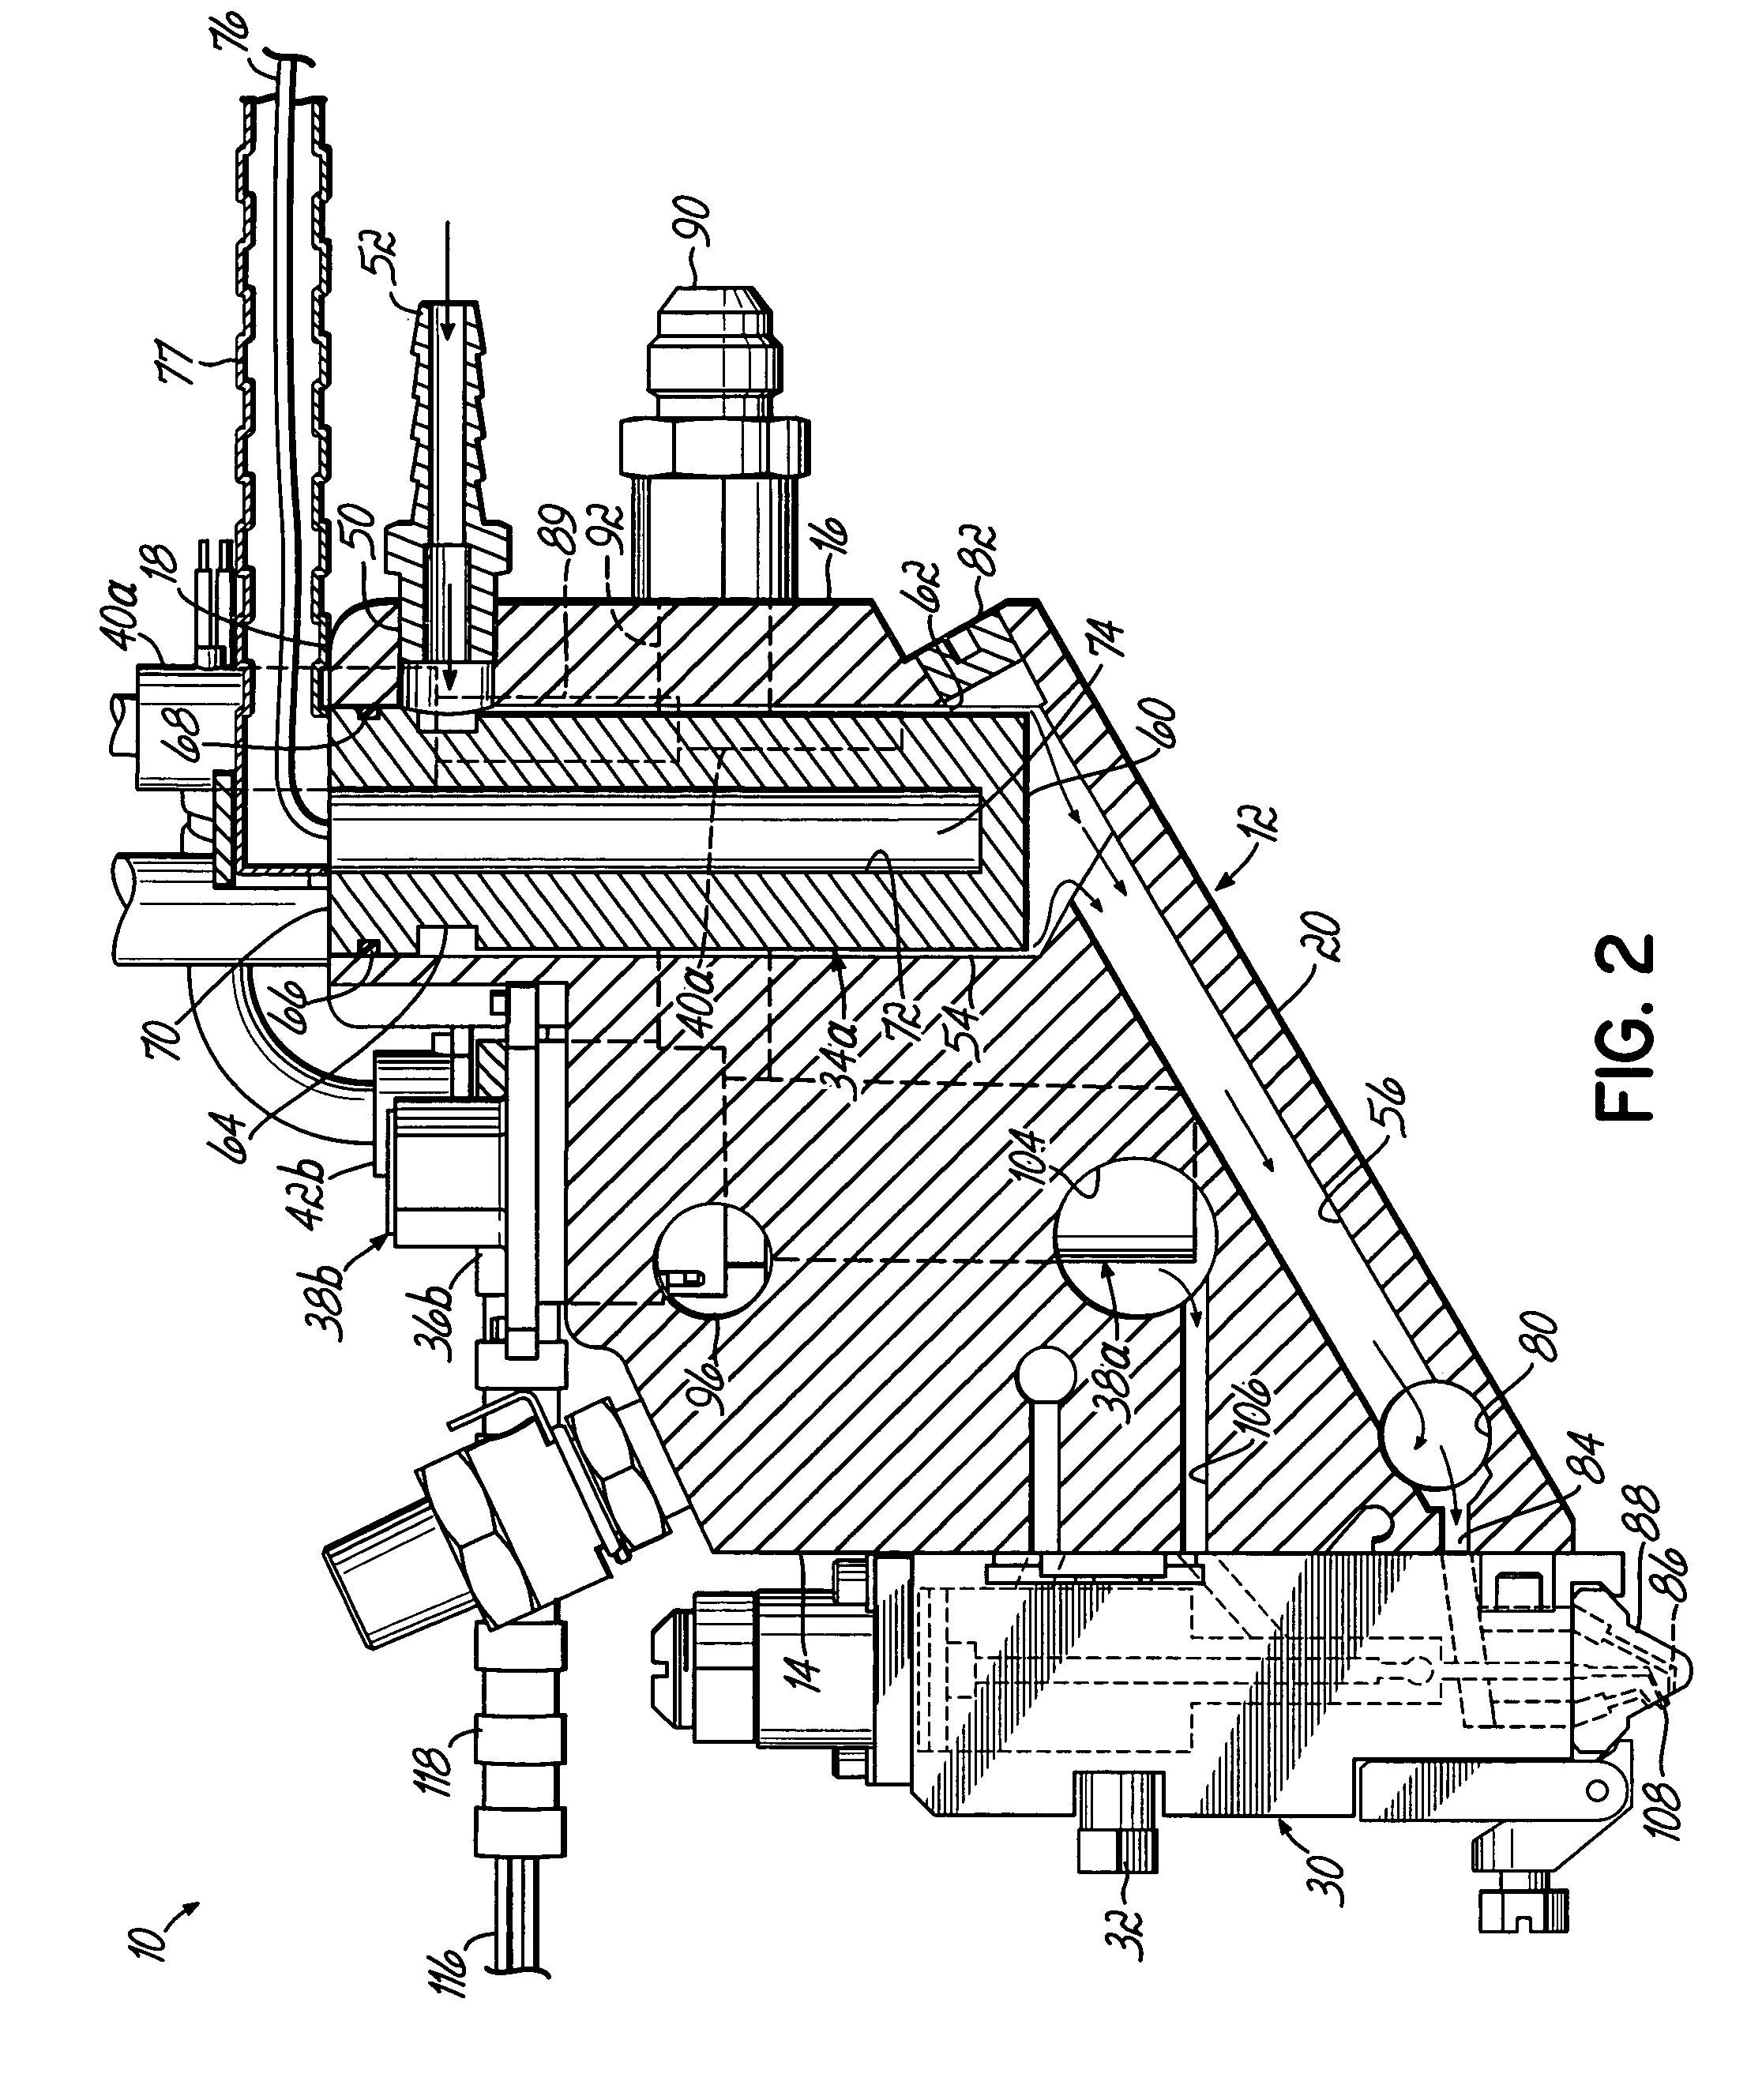 Integral manifold for liquid material dispensing systems